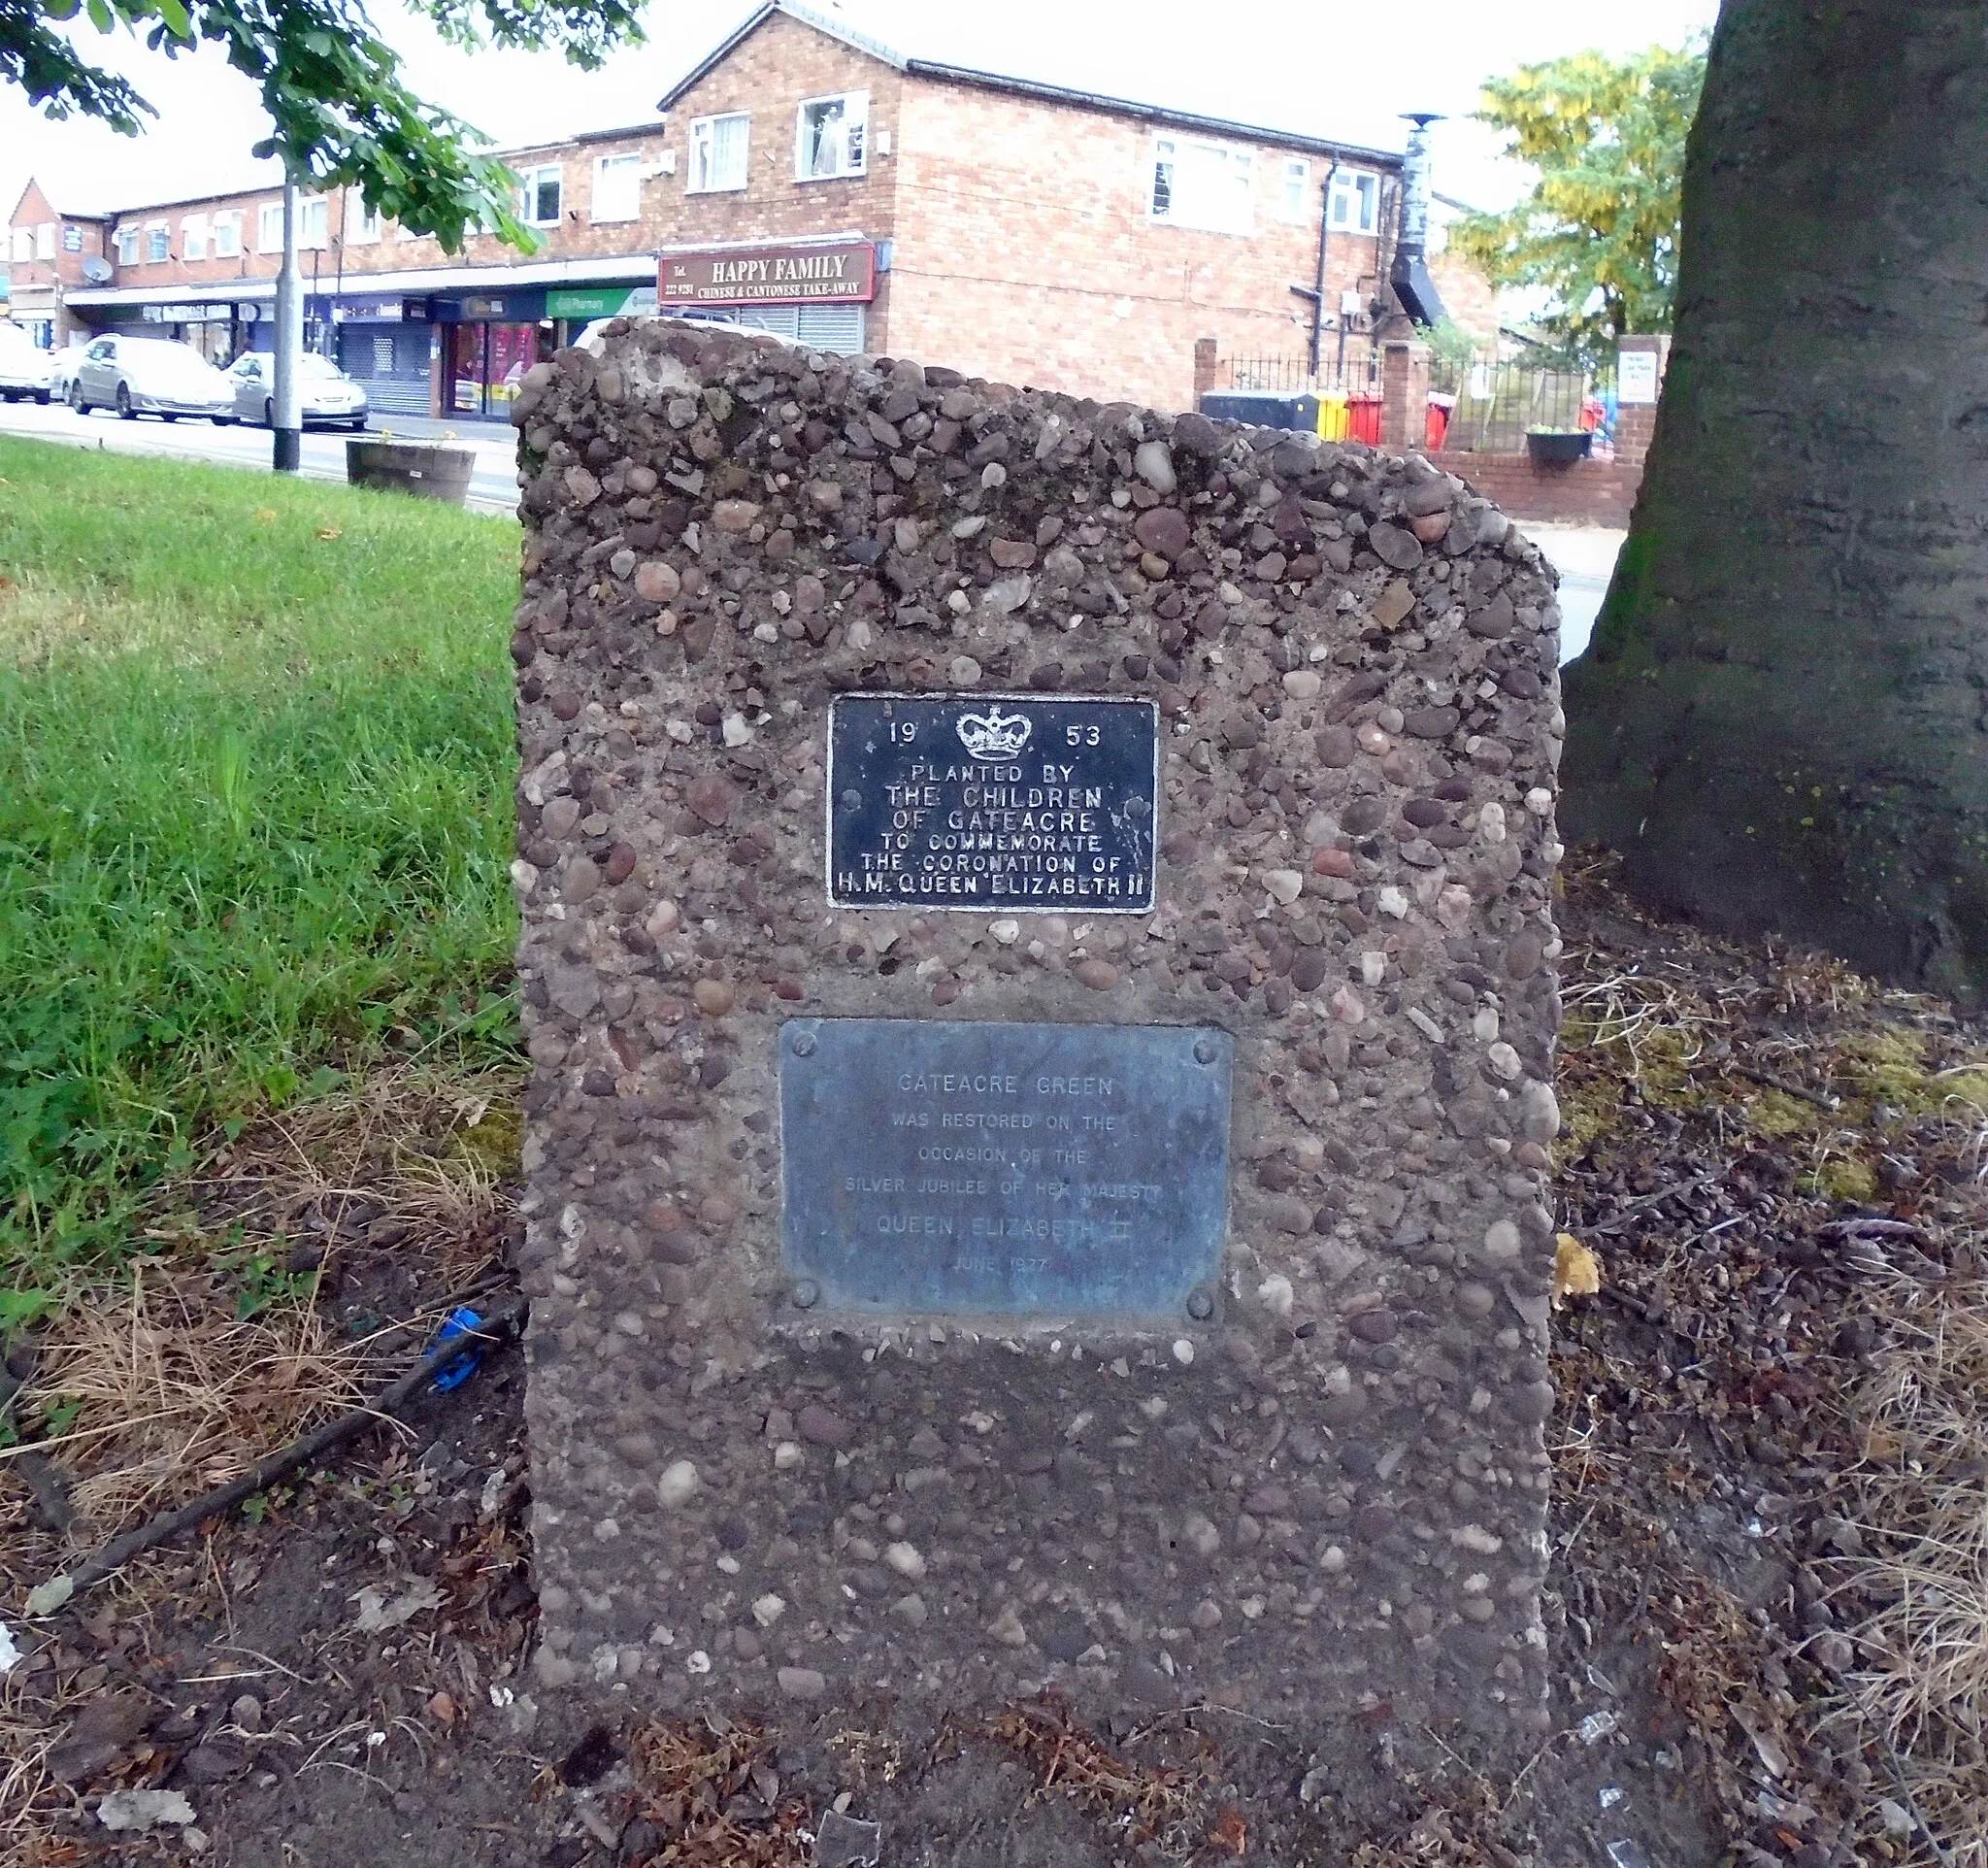 Photo showing: Plaques at Gateacre Green commemorating the coronation of Queen Elizabeth II in 1953, and the jubilee of 1977.